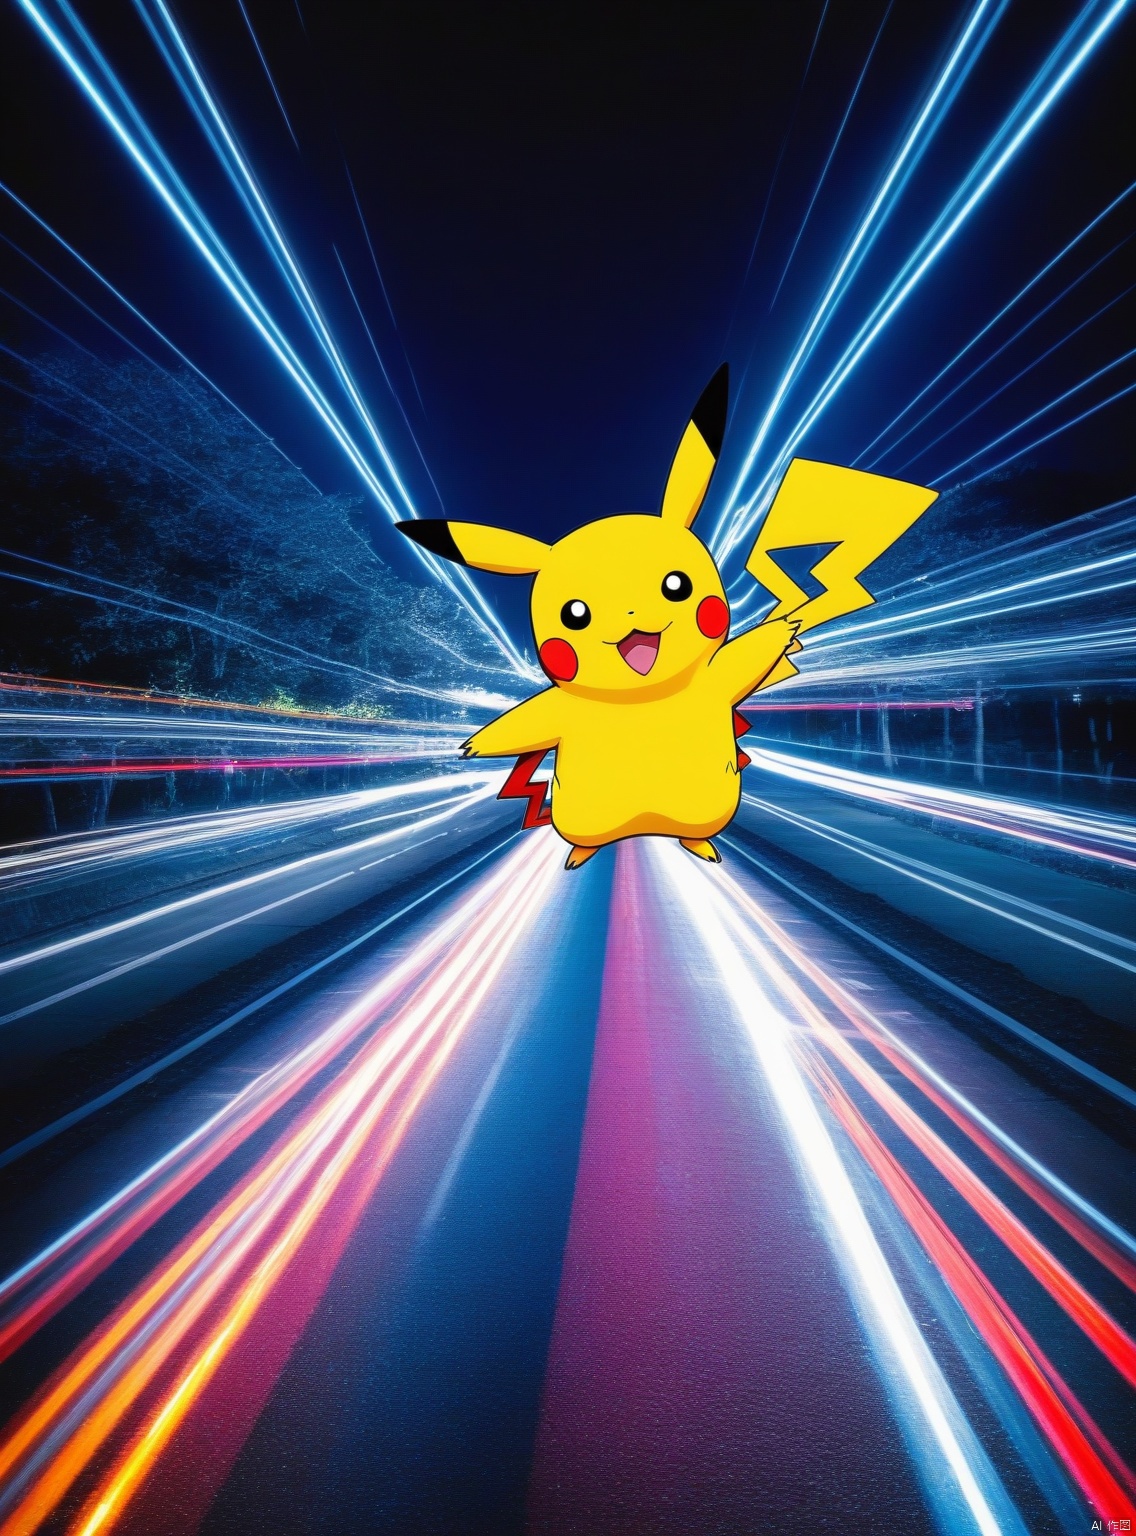 (Light Trails Photography 1.2), award winning, hantu ular , pikachu,(aesthetic of hyperpop art with thunderous atmosphere:0.5), bloom, clear background, f/16, symmetry and balance, trailblazing stroke of genius with extraordinary details, (silver and sparkling colors:0.1), d